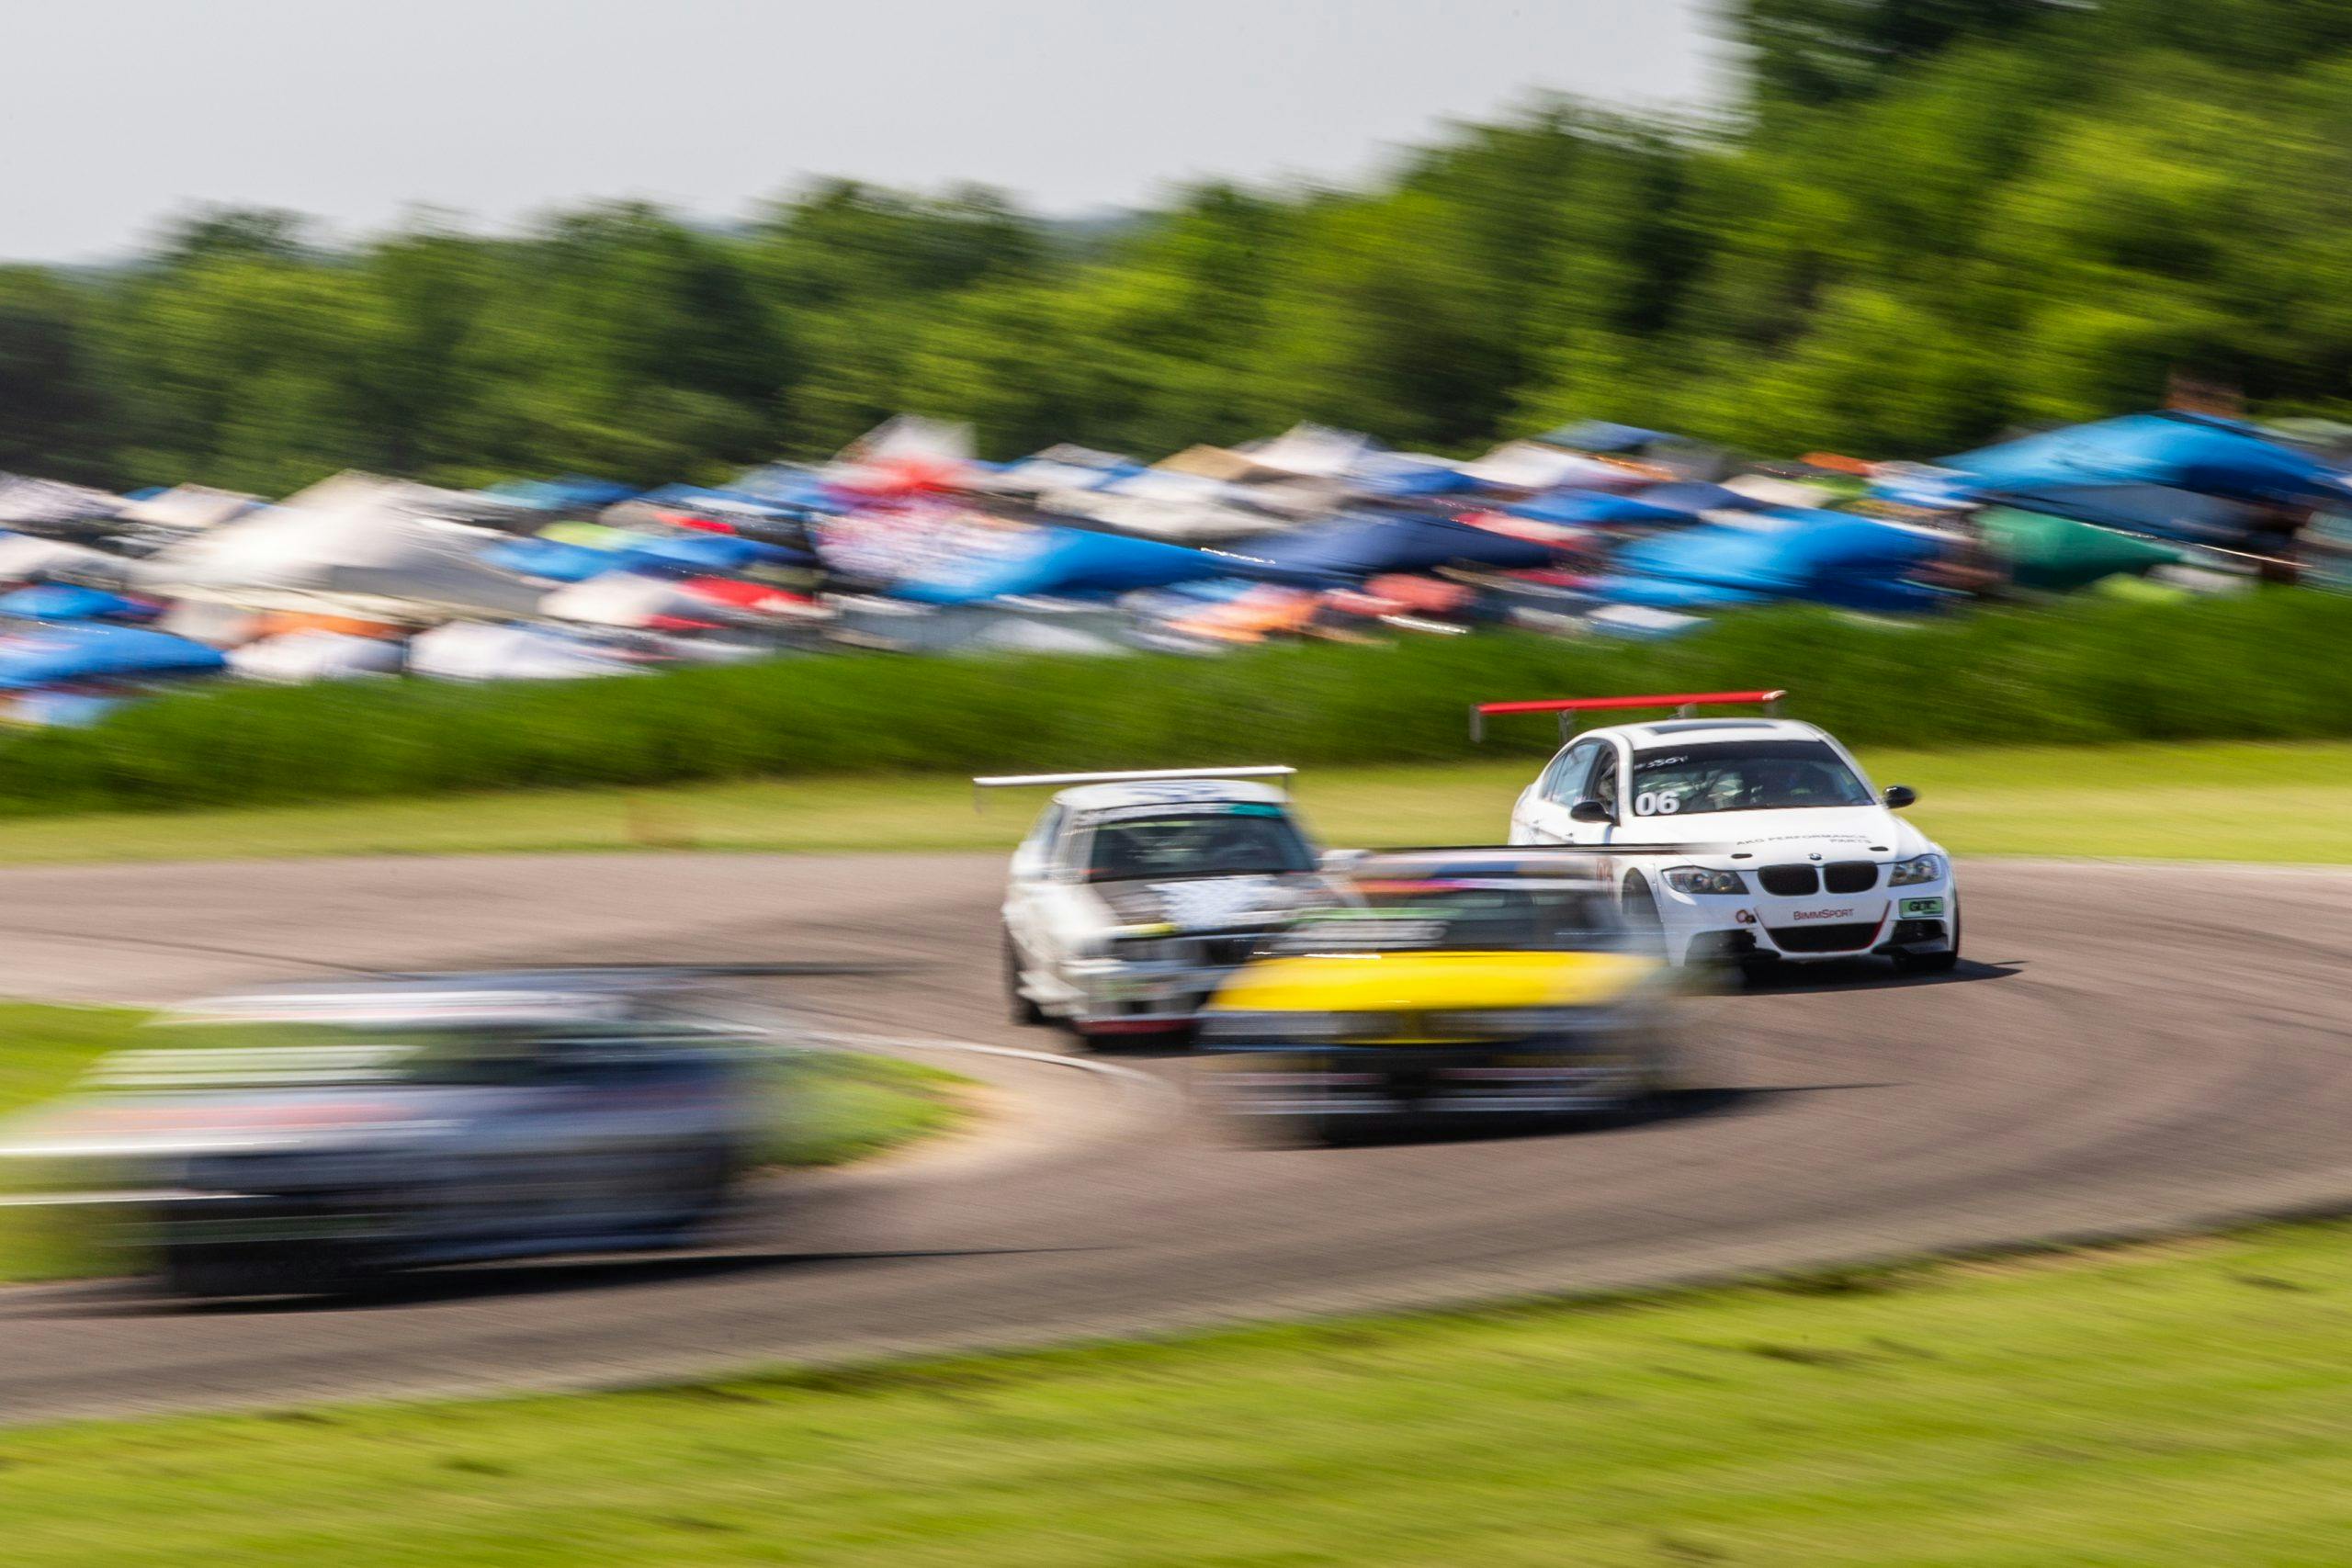 Gridlife Midwest track